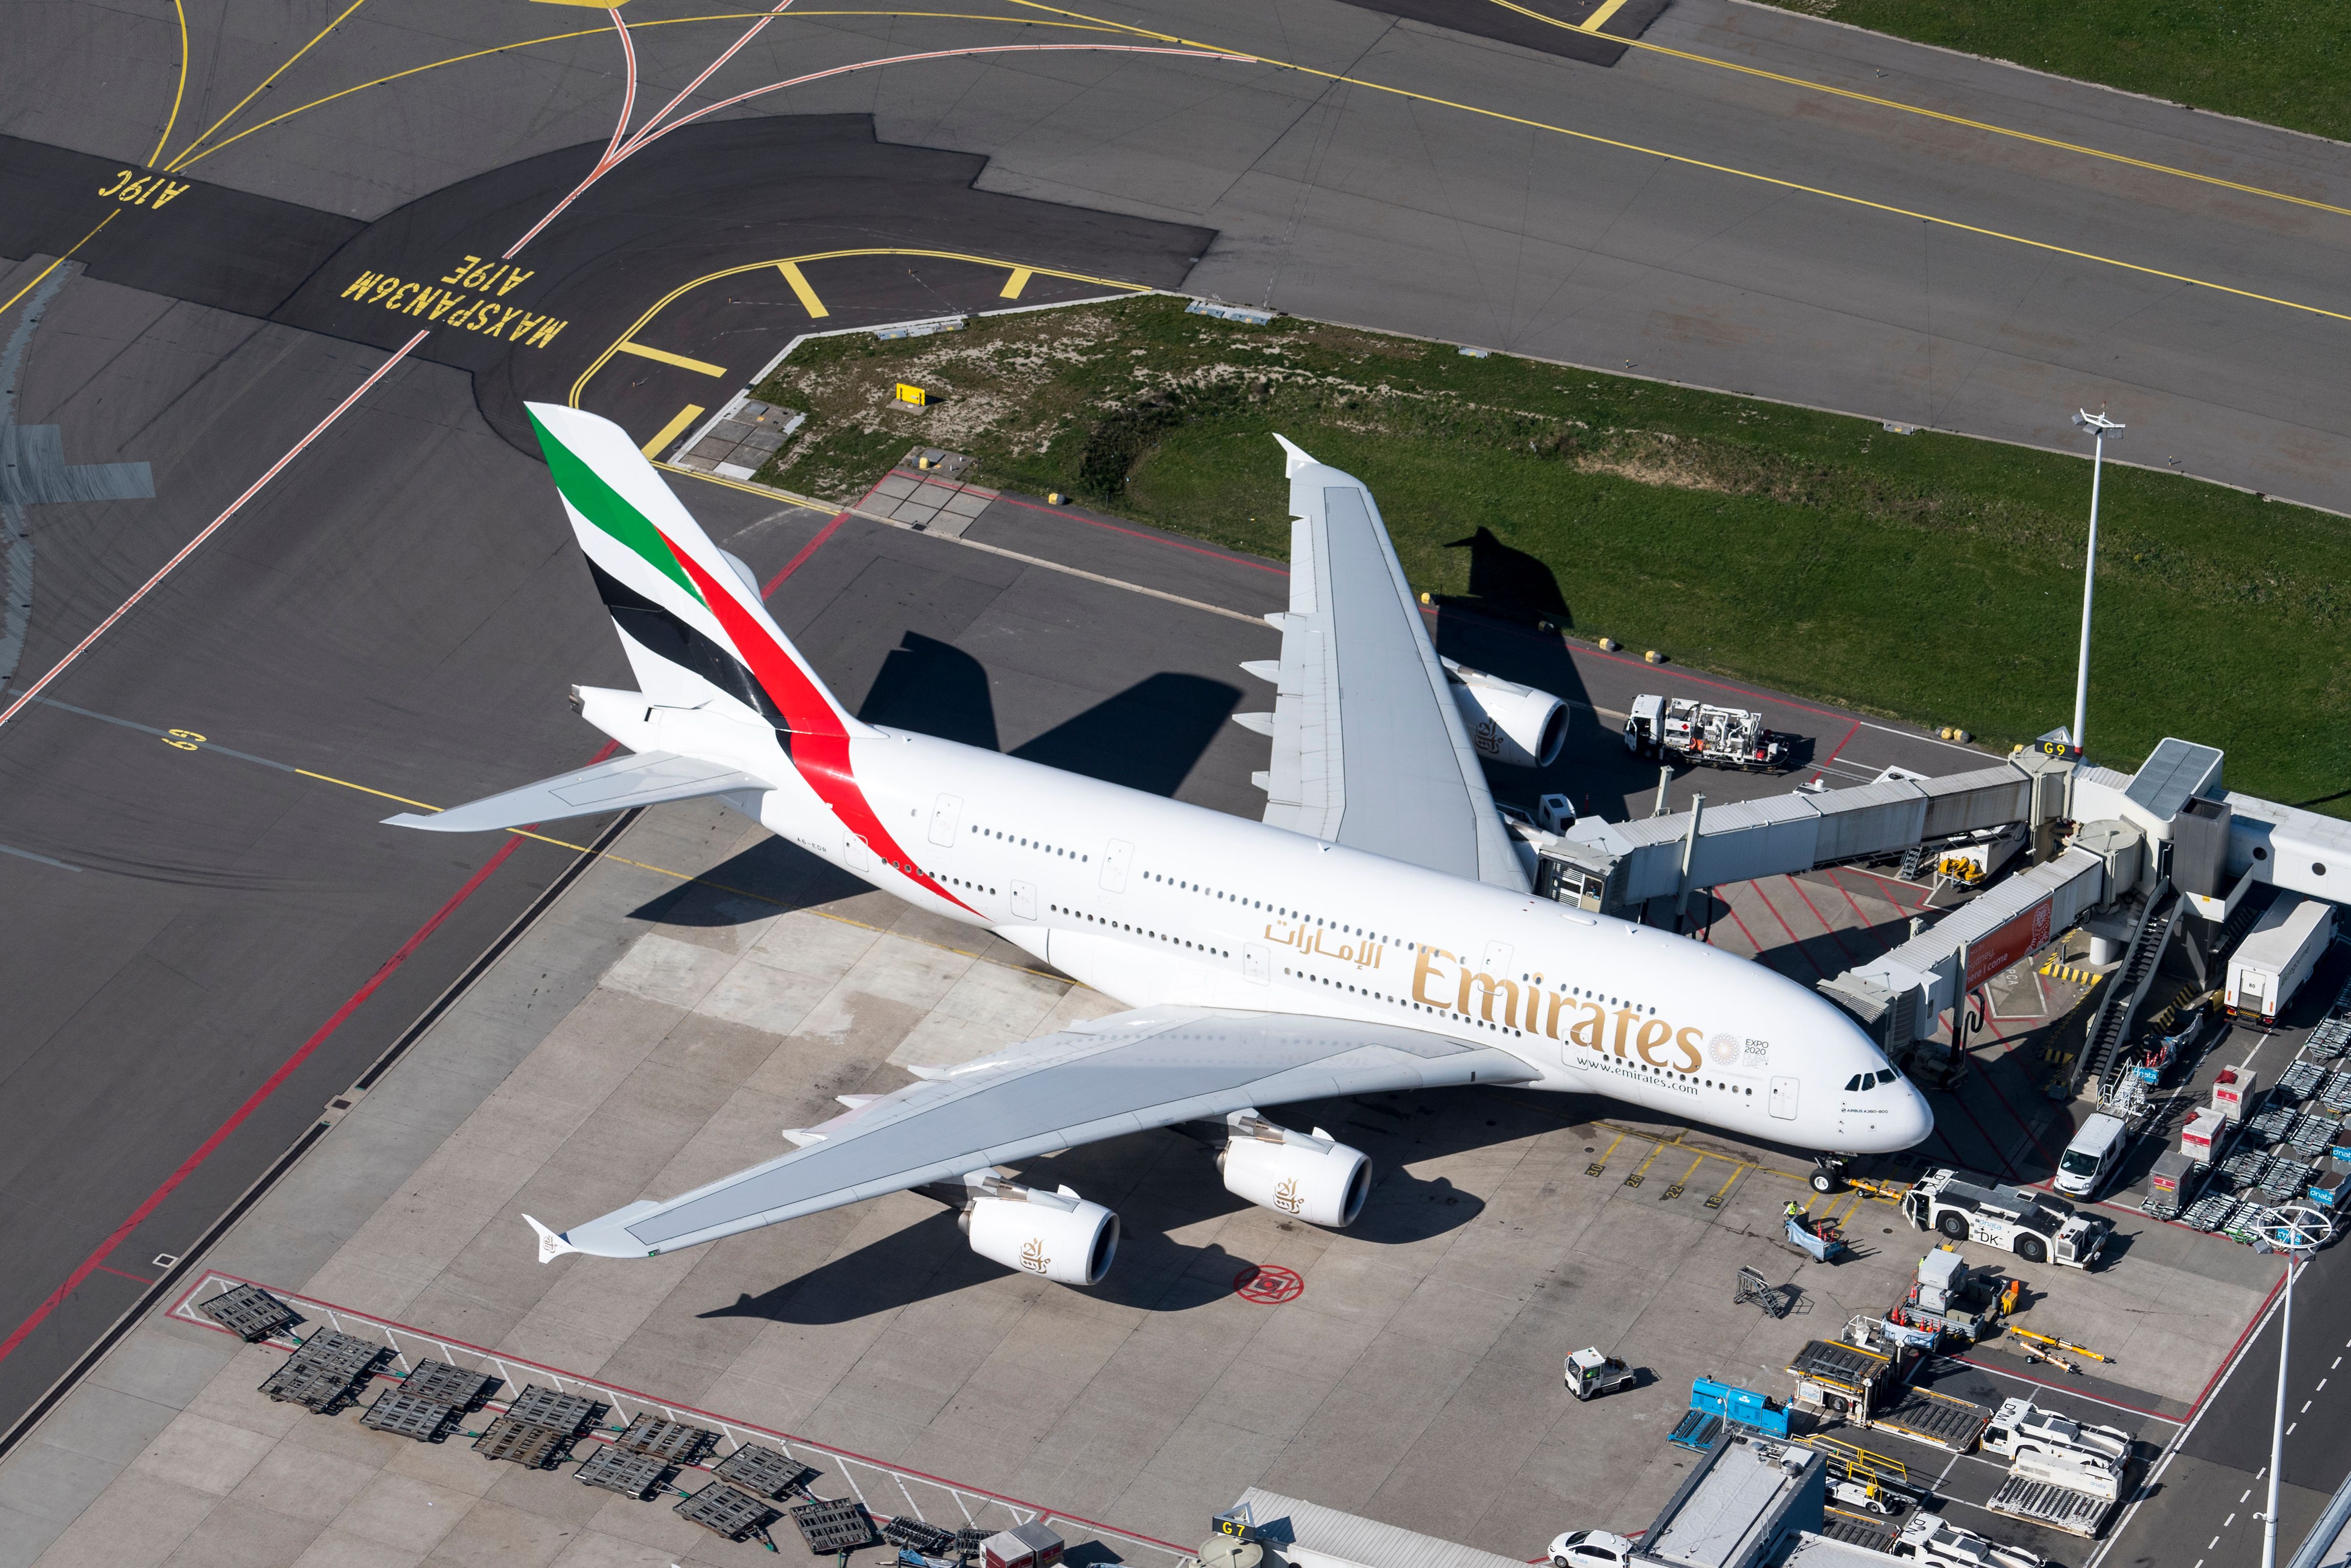 Emirates Airbus A380 at Amsterdam Schiphol Airport AMS shutterstock_1397146538